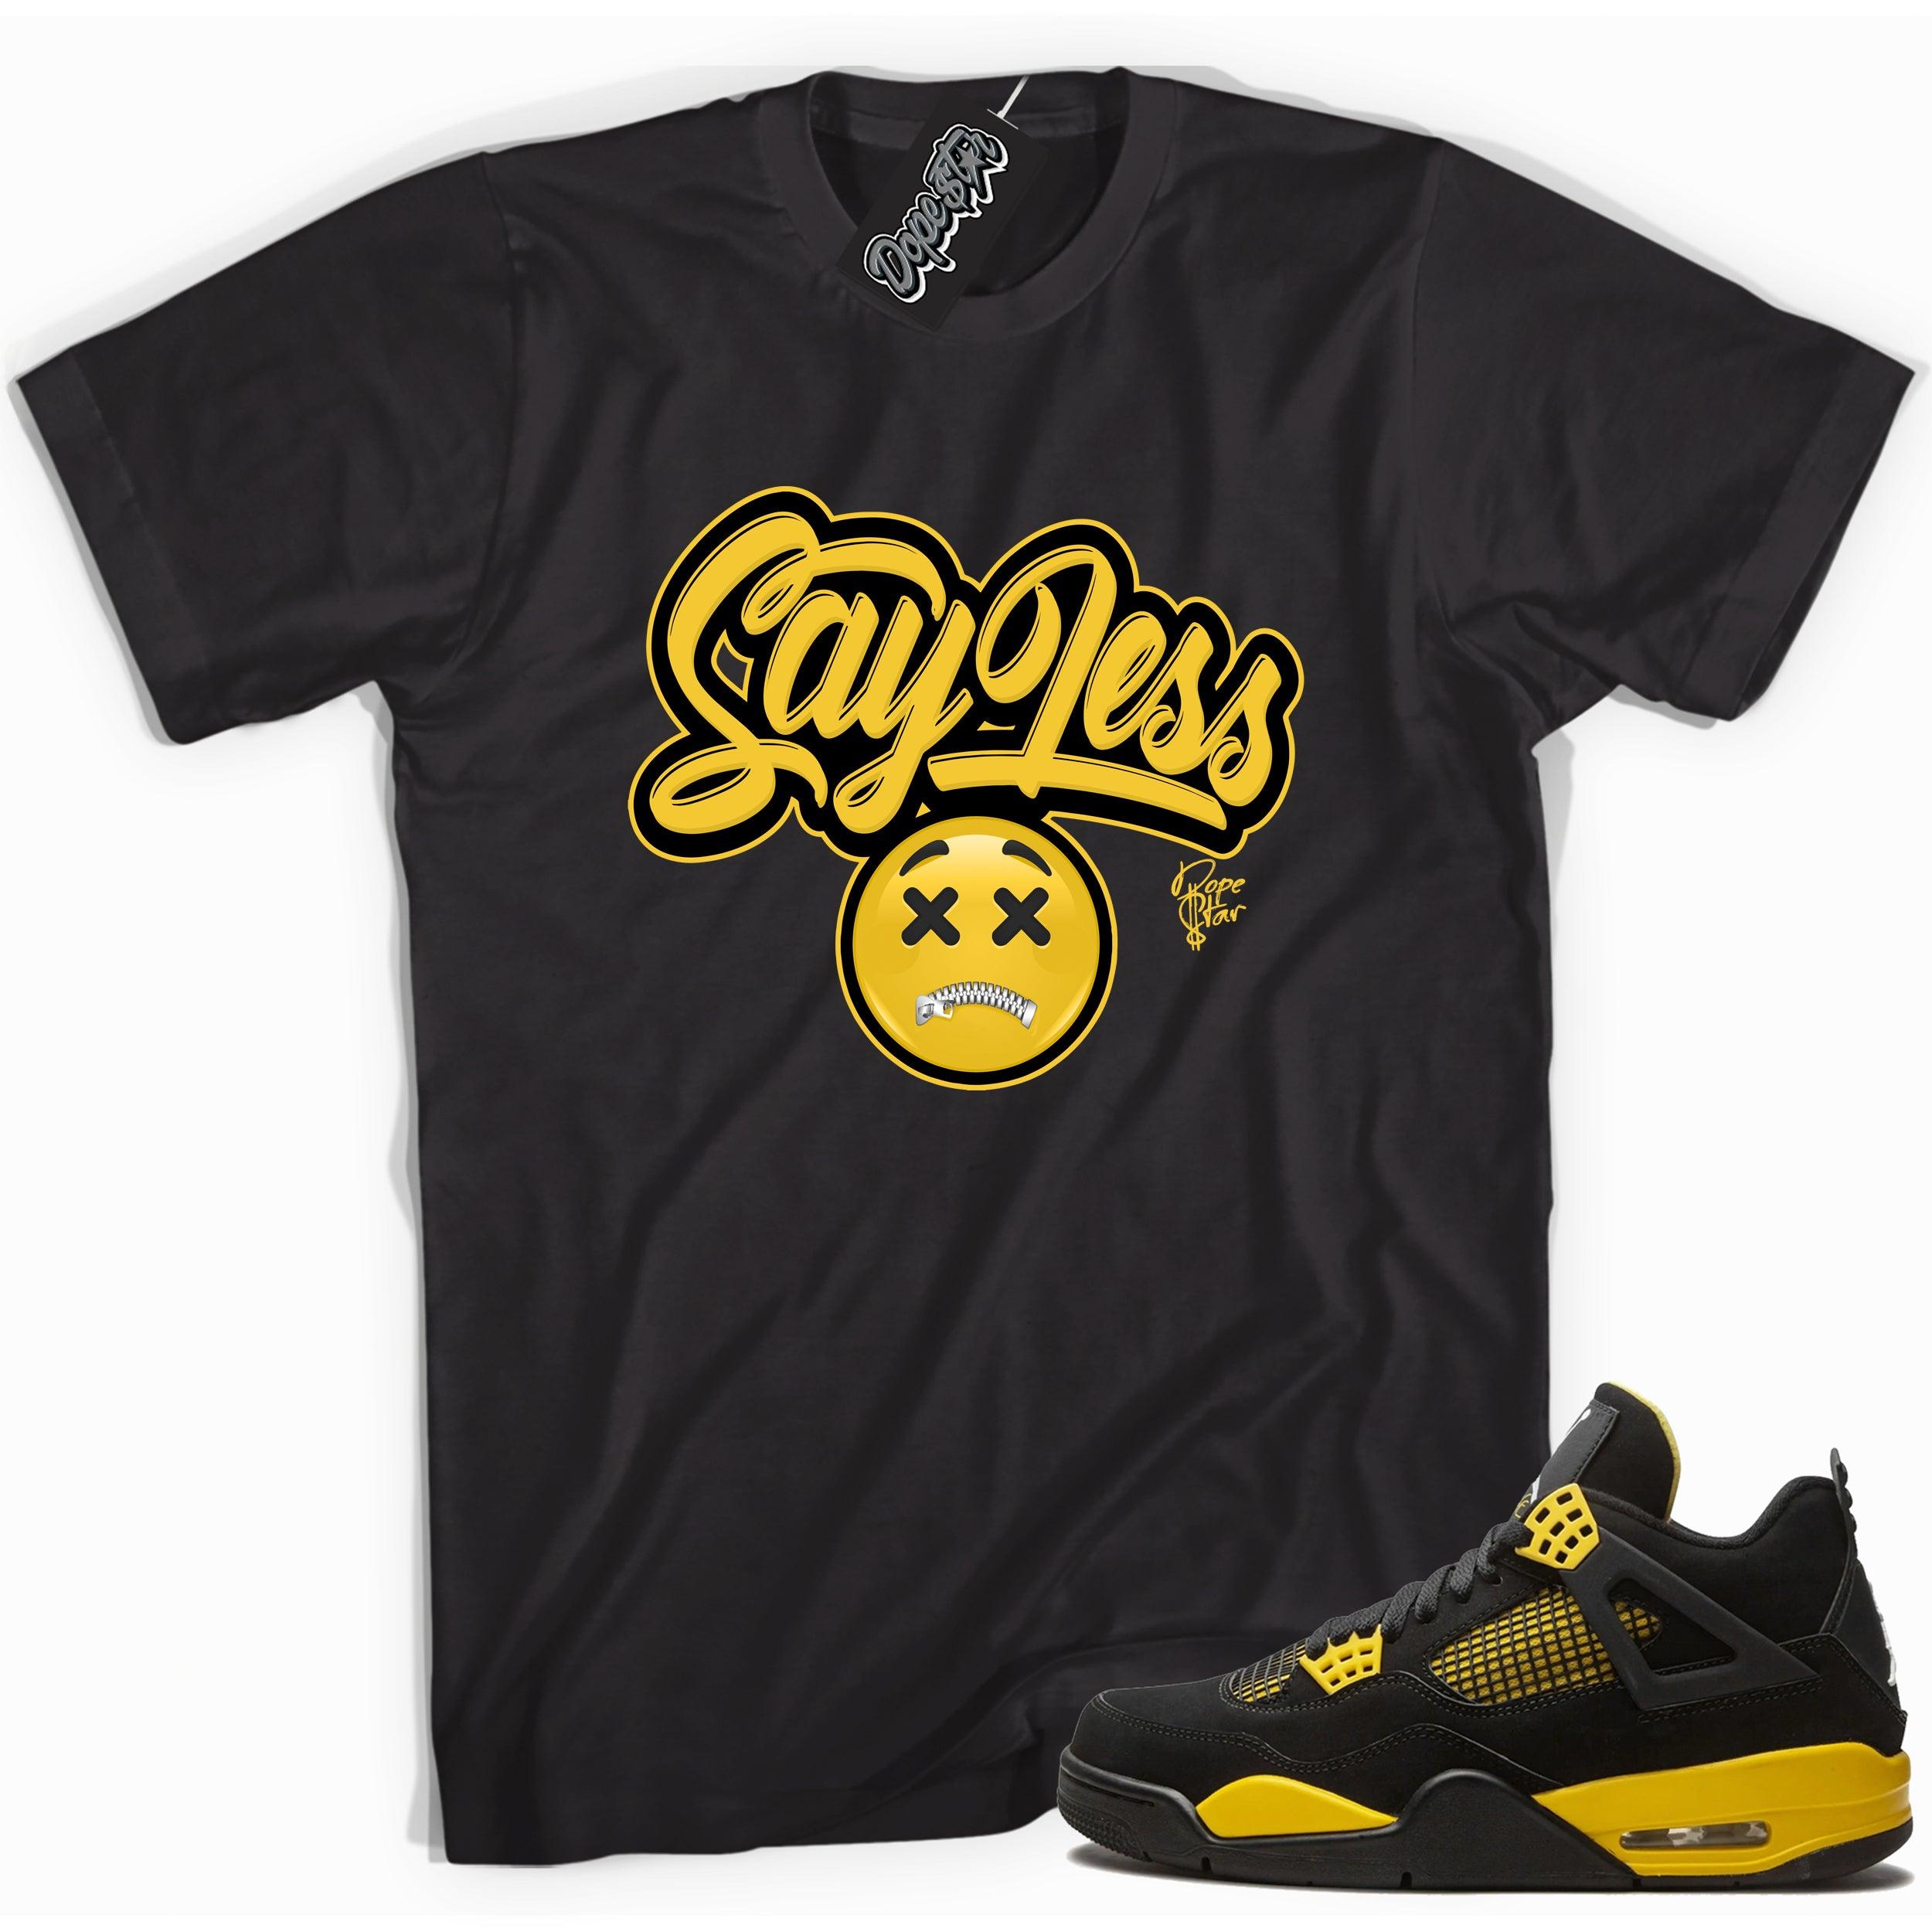 Cool black graphic tee with 'say less' print, that perfectly matches  Air Jordan 4 Thunder sneakers